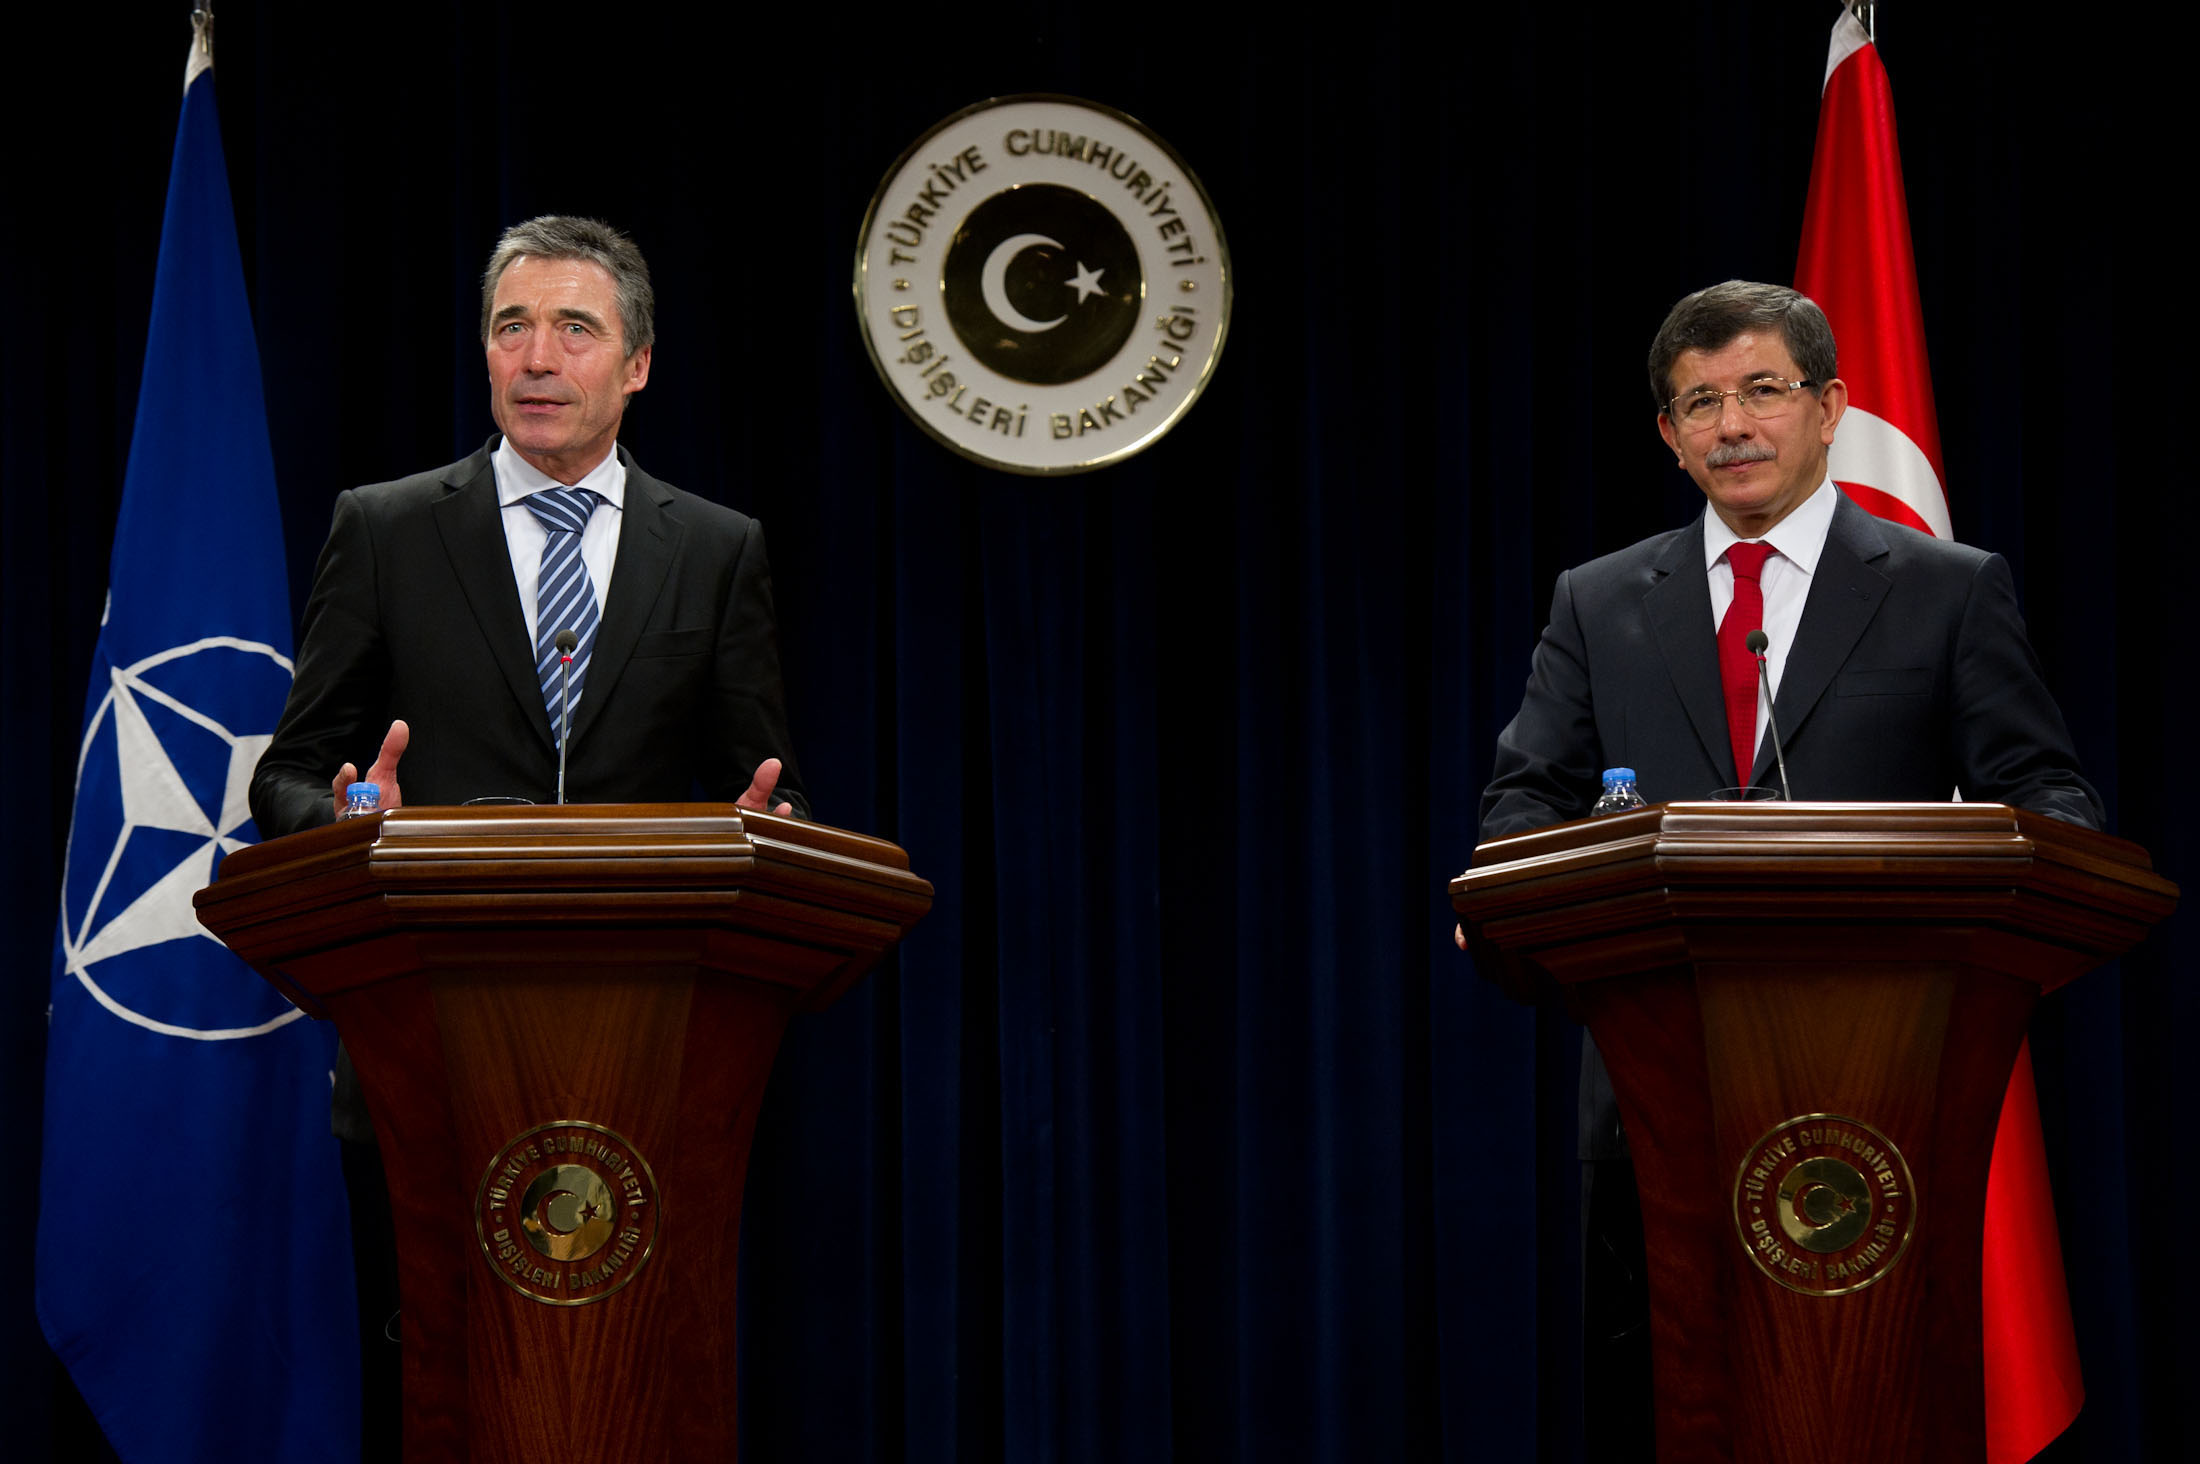 NATO Secretary General Anders Fogh Rasmussen and Turkish Minister of Foreign Minister Ahmet Davutoglu, Feb. 17, 2012